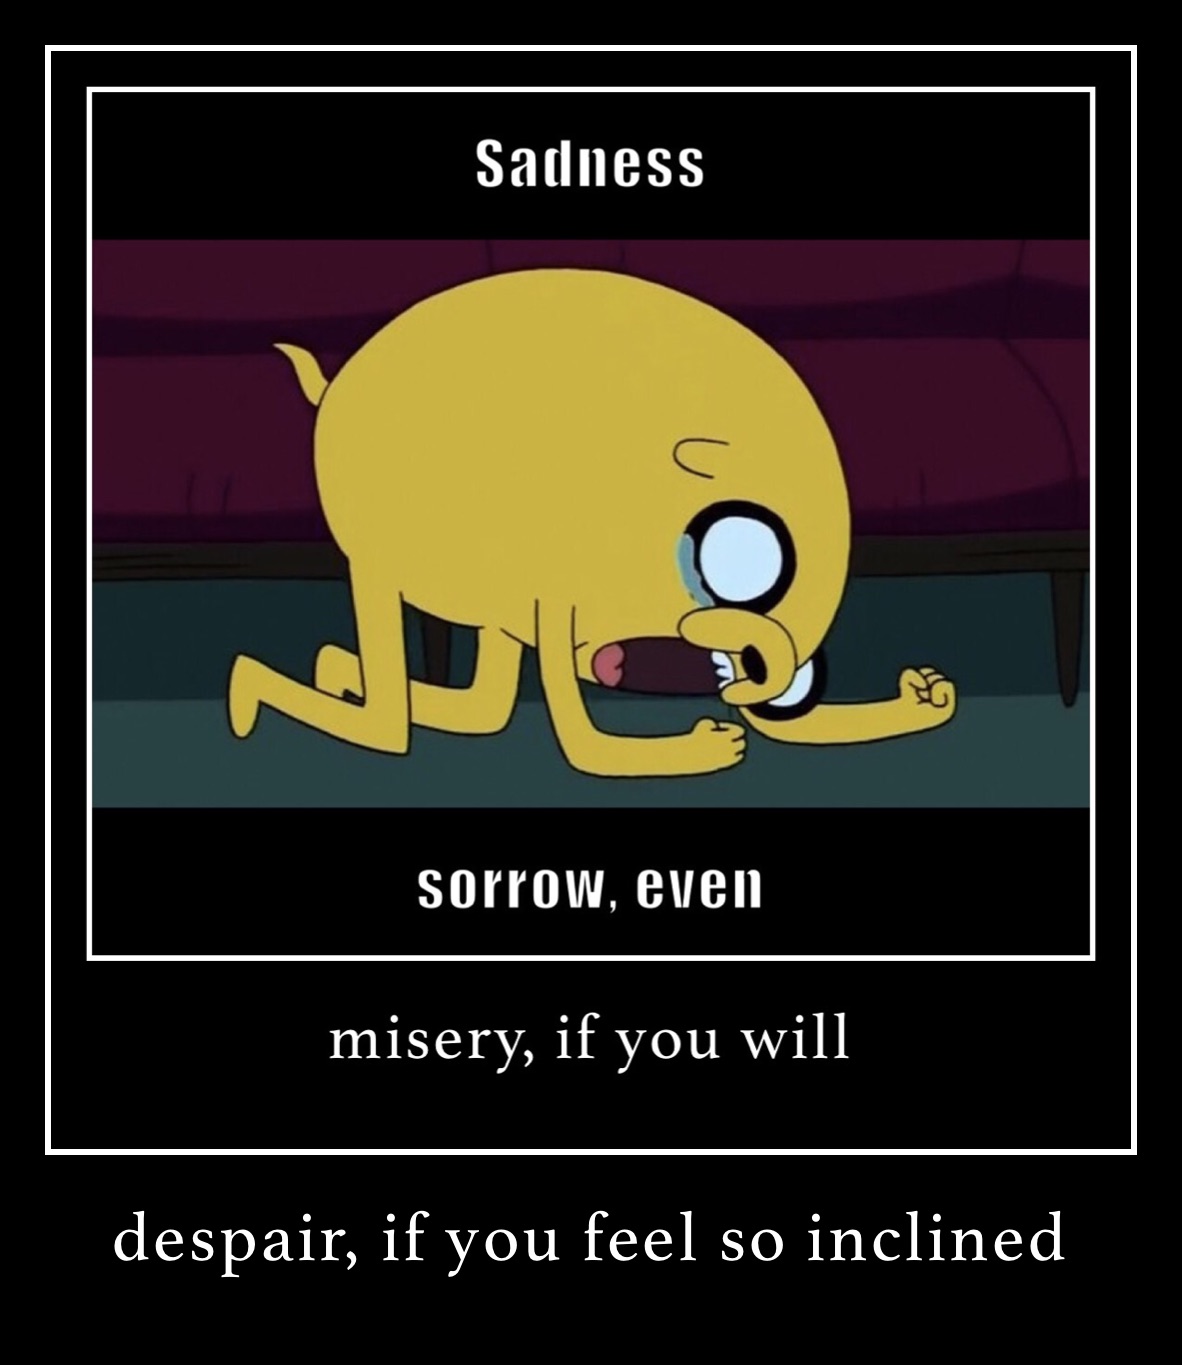 despair, if you feel so inclined